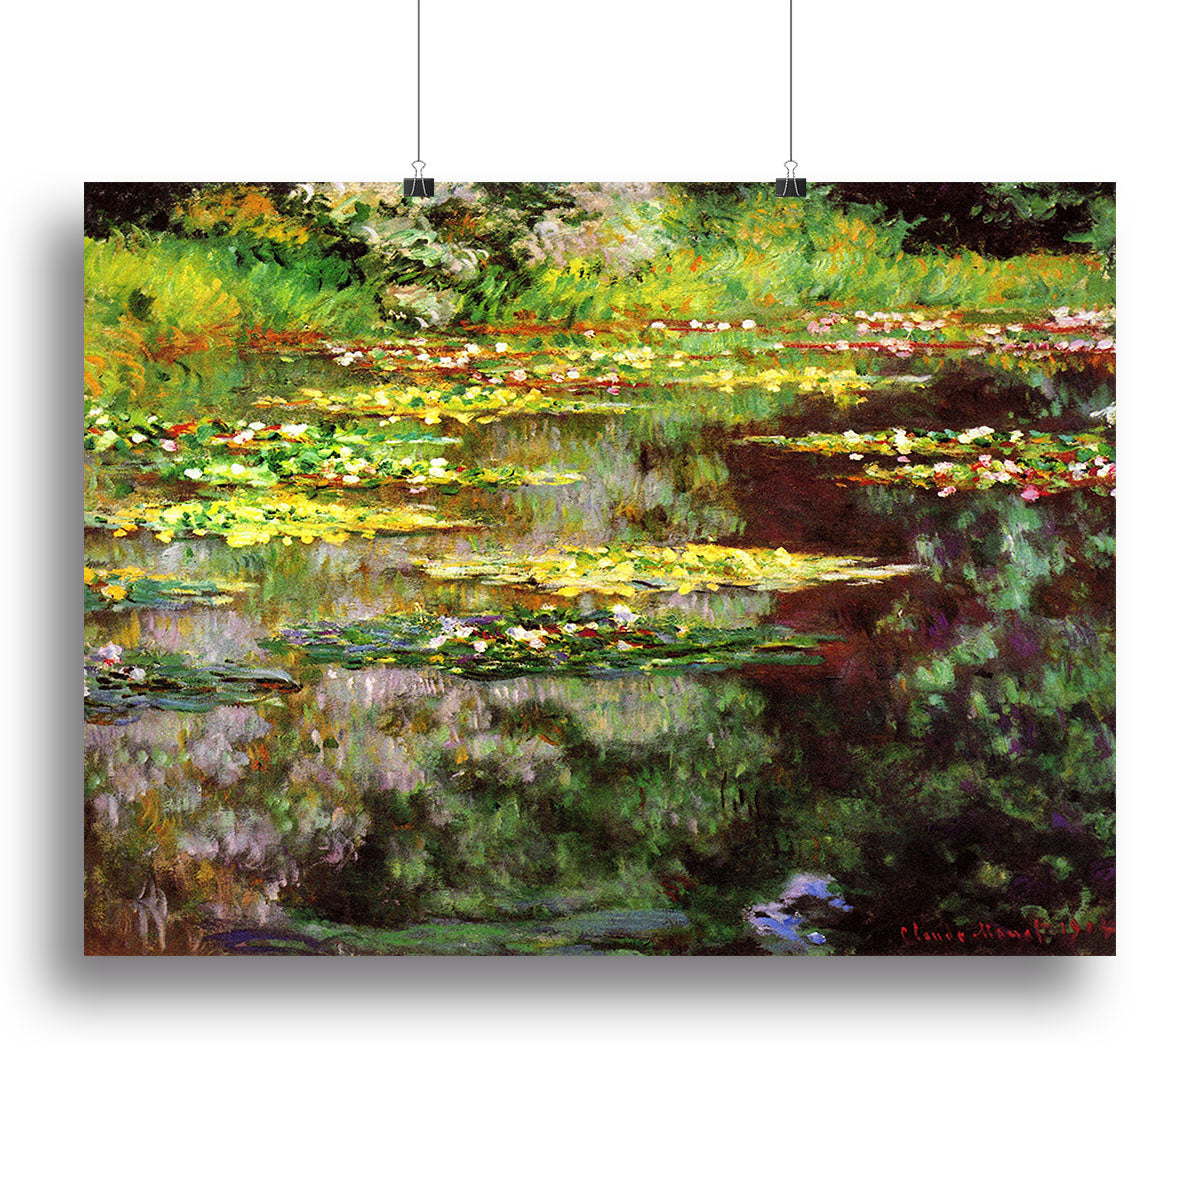 Sea rose pond by Monet Canvas Print or Poster - Canvas Art Rocks - 2